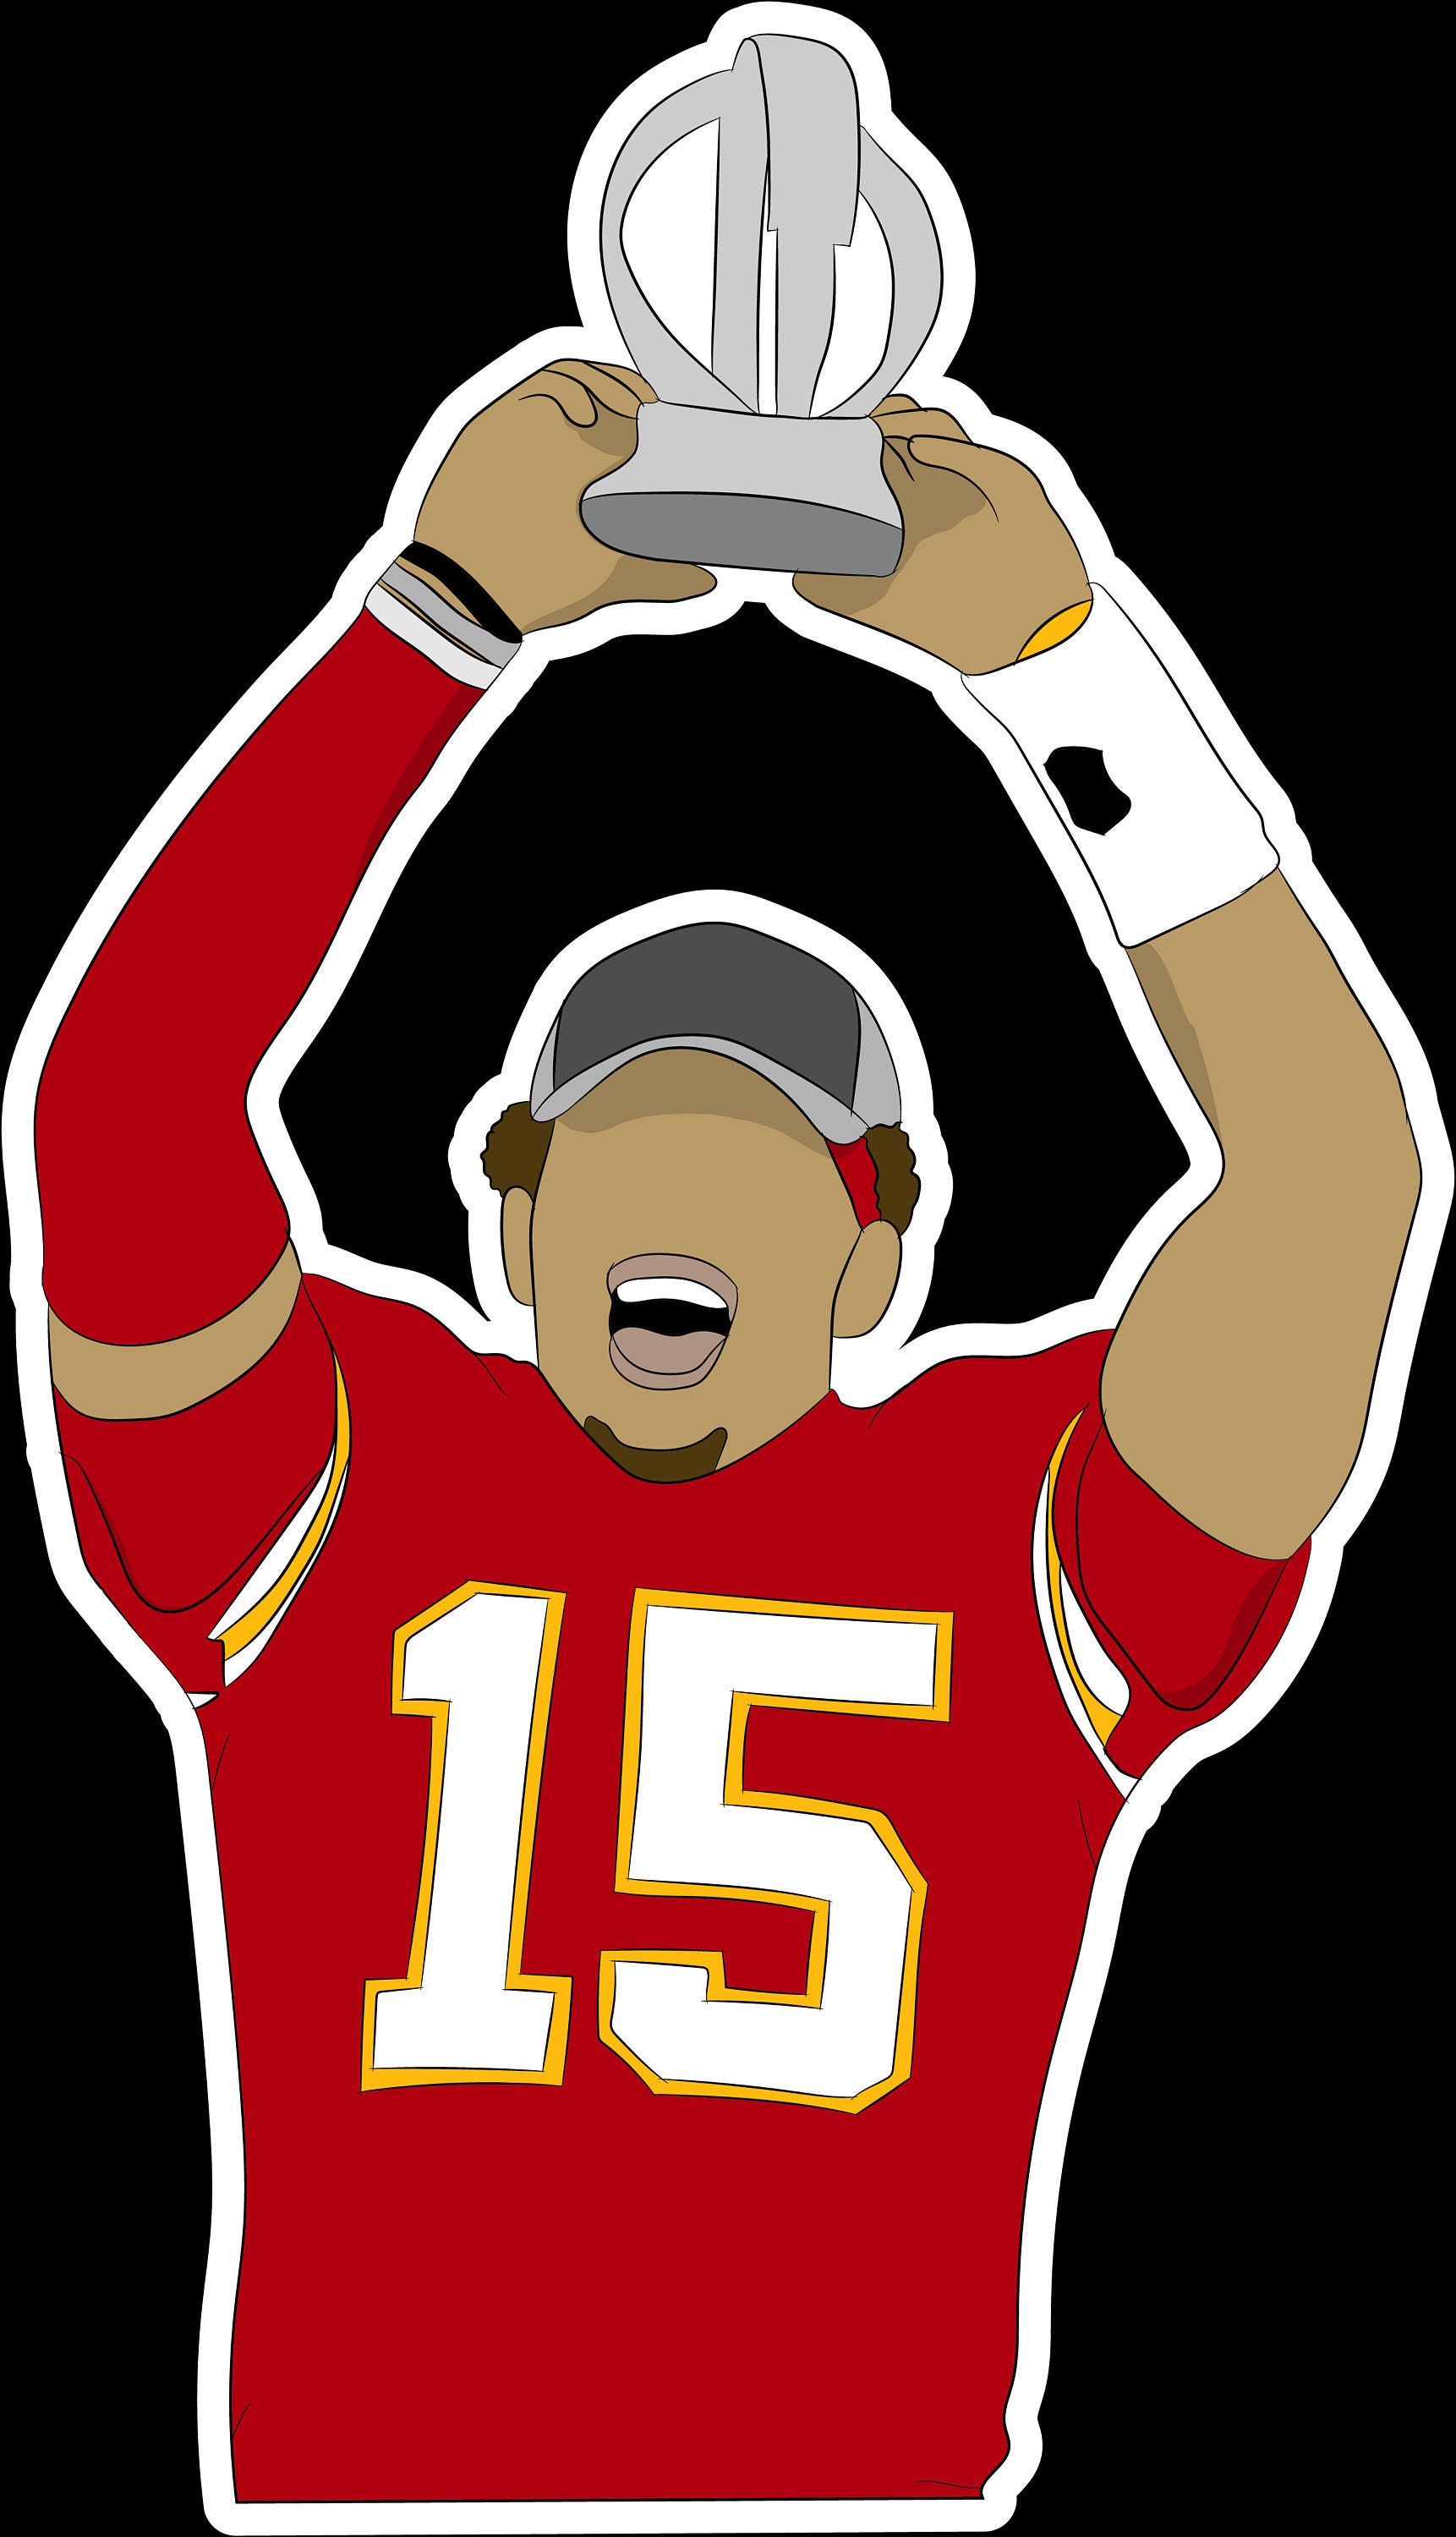 Discover Patrick Mahomes "Trophy" Sticker